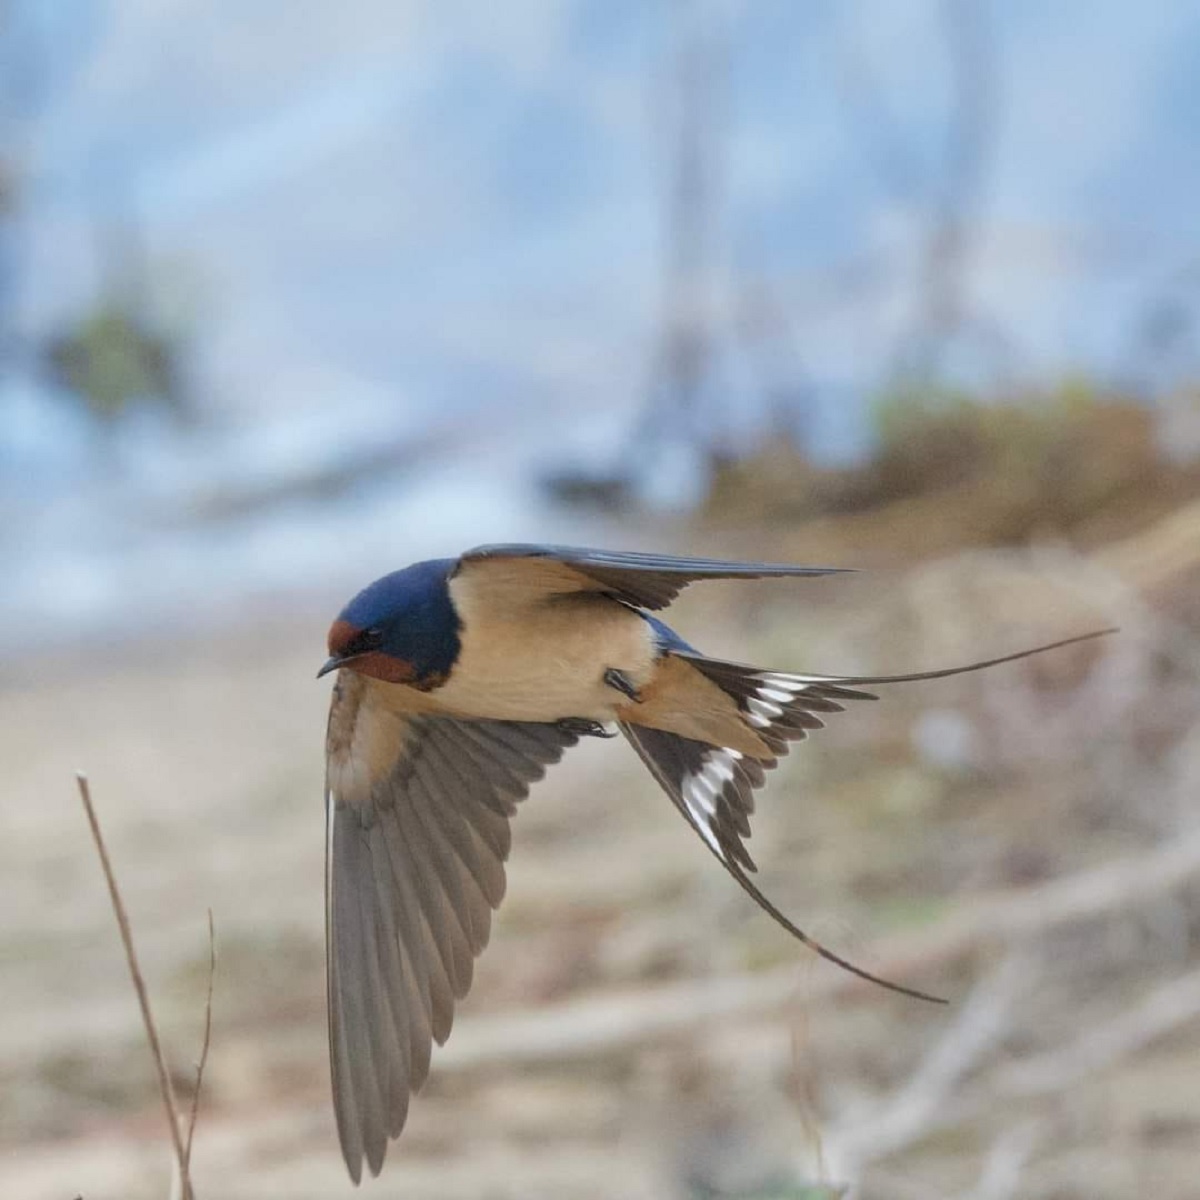 Sight for soar eyes - Jeff Biddle took this fantastic picture of a swallow